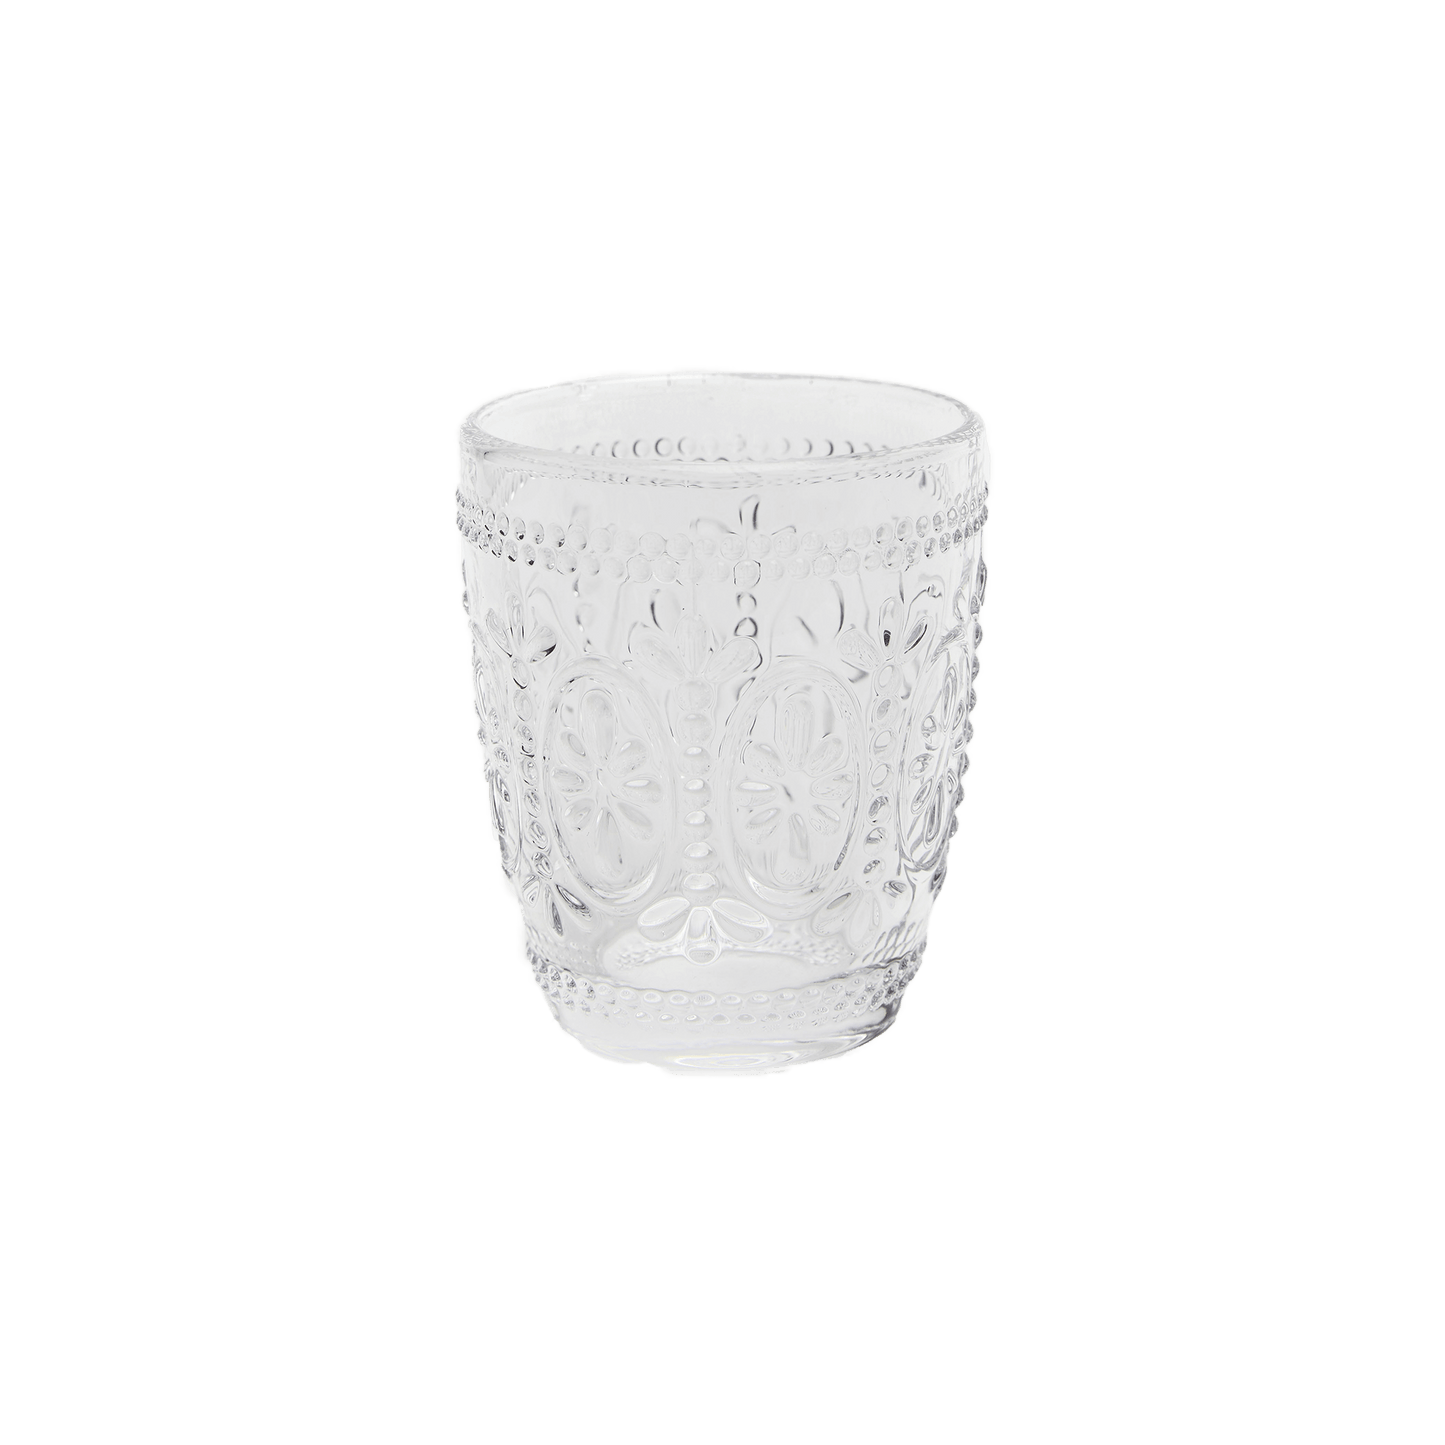 Tumbler Glass Set of 4 Clear